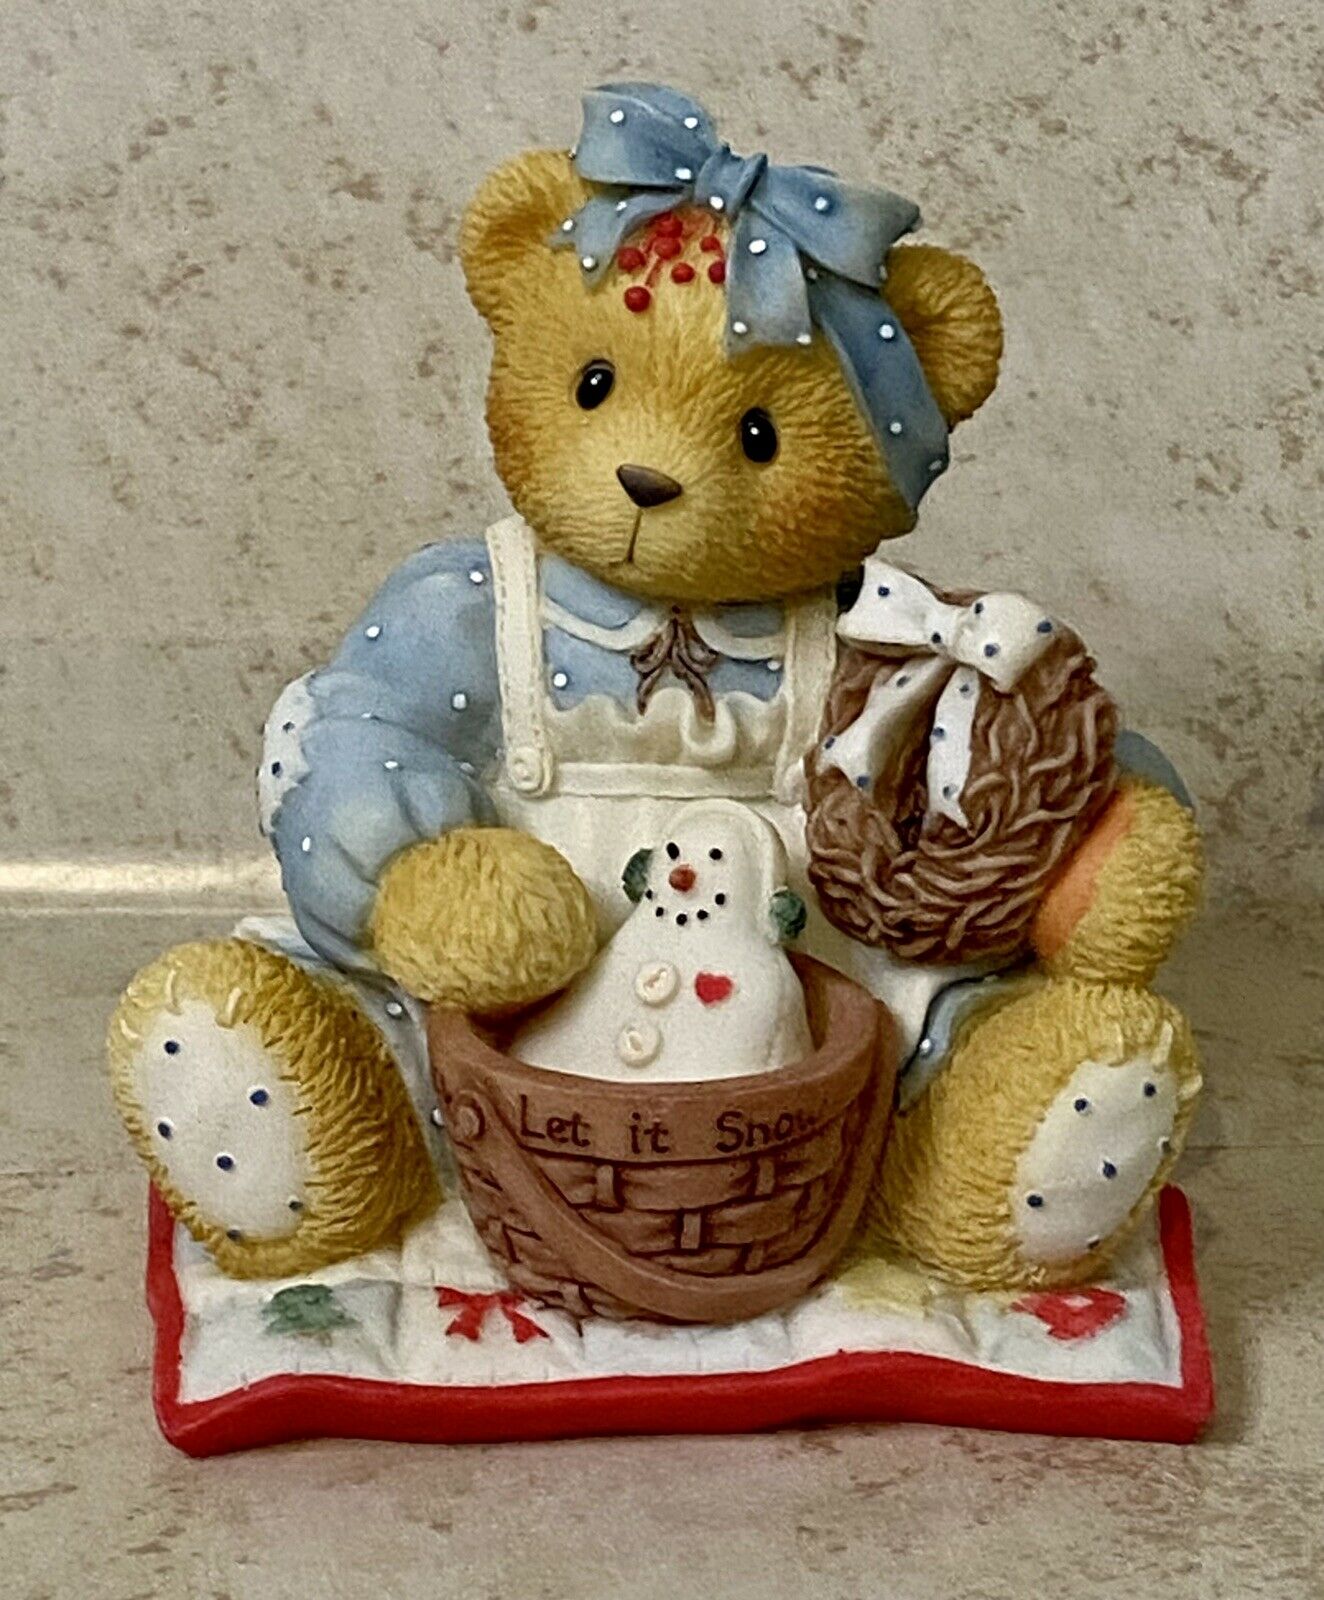 Suzanne "home Sweet Country Home" #533785 Cherished Teddies Figurine Snowman